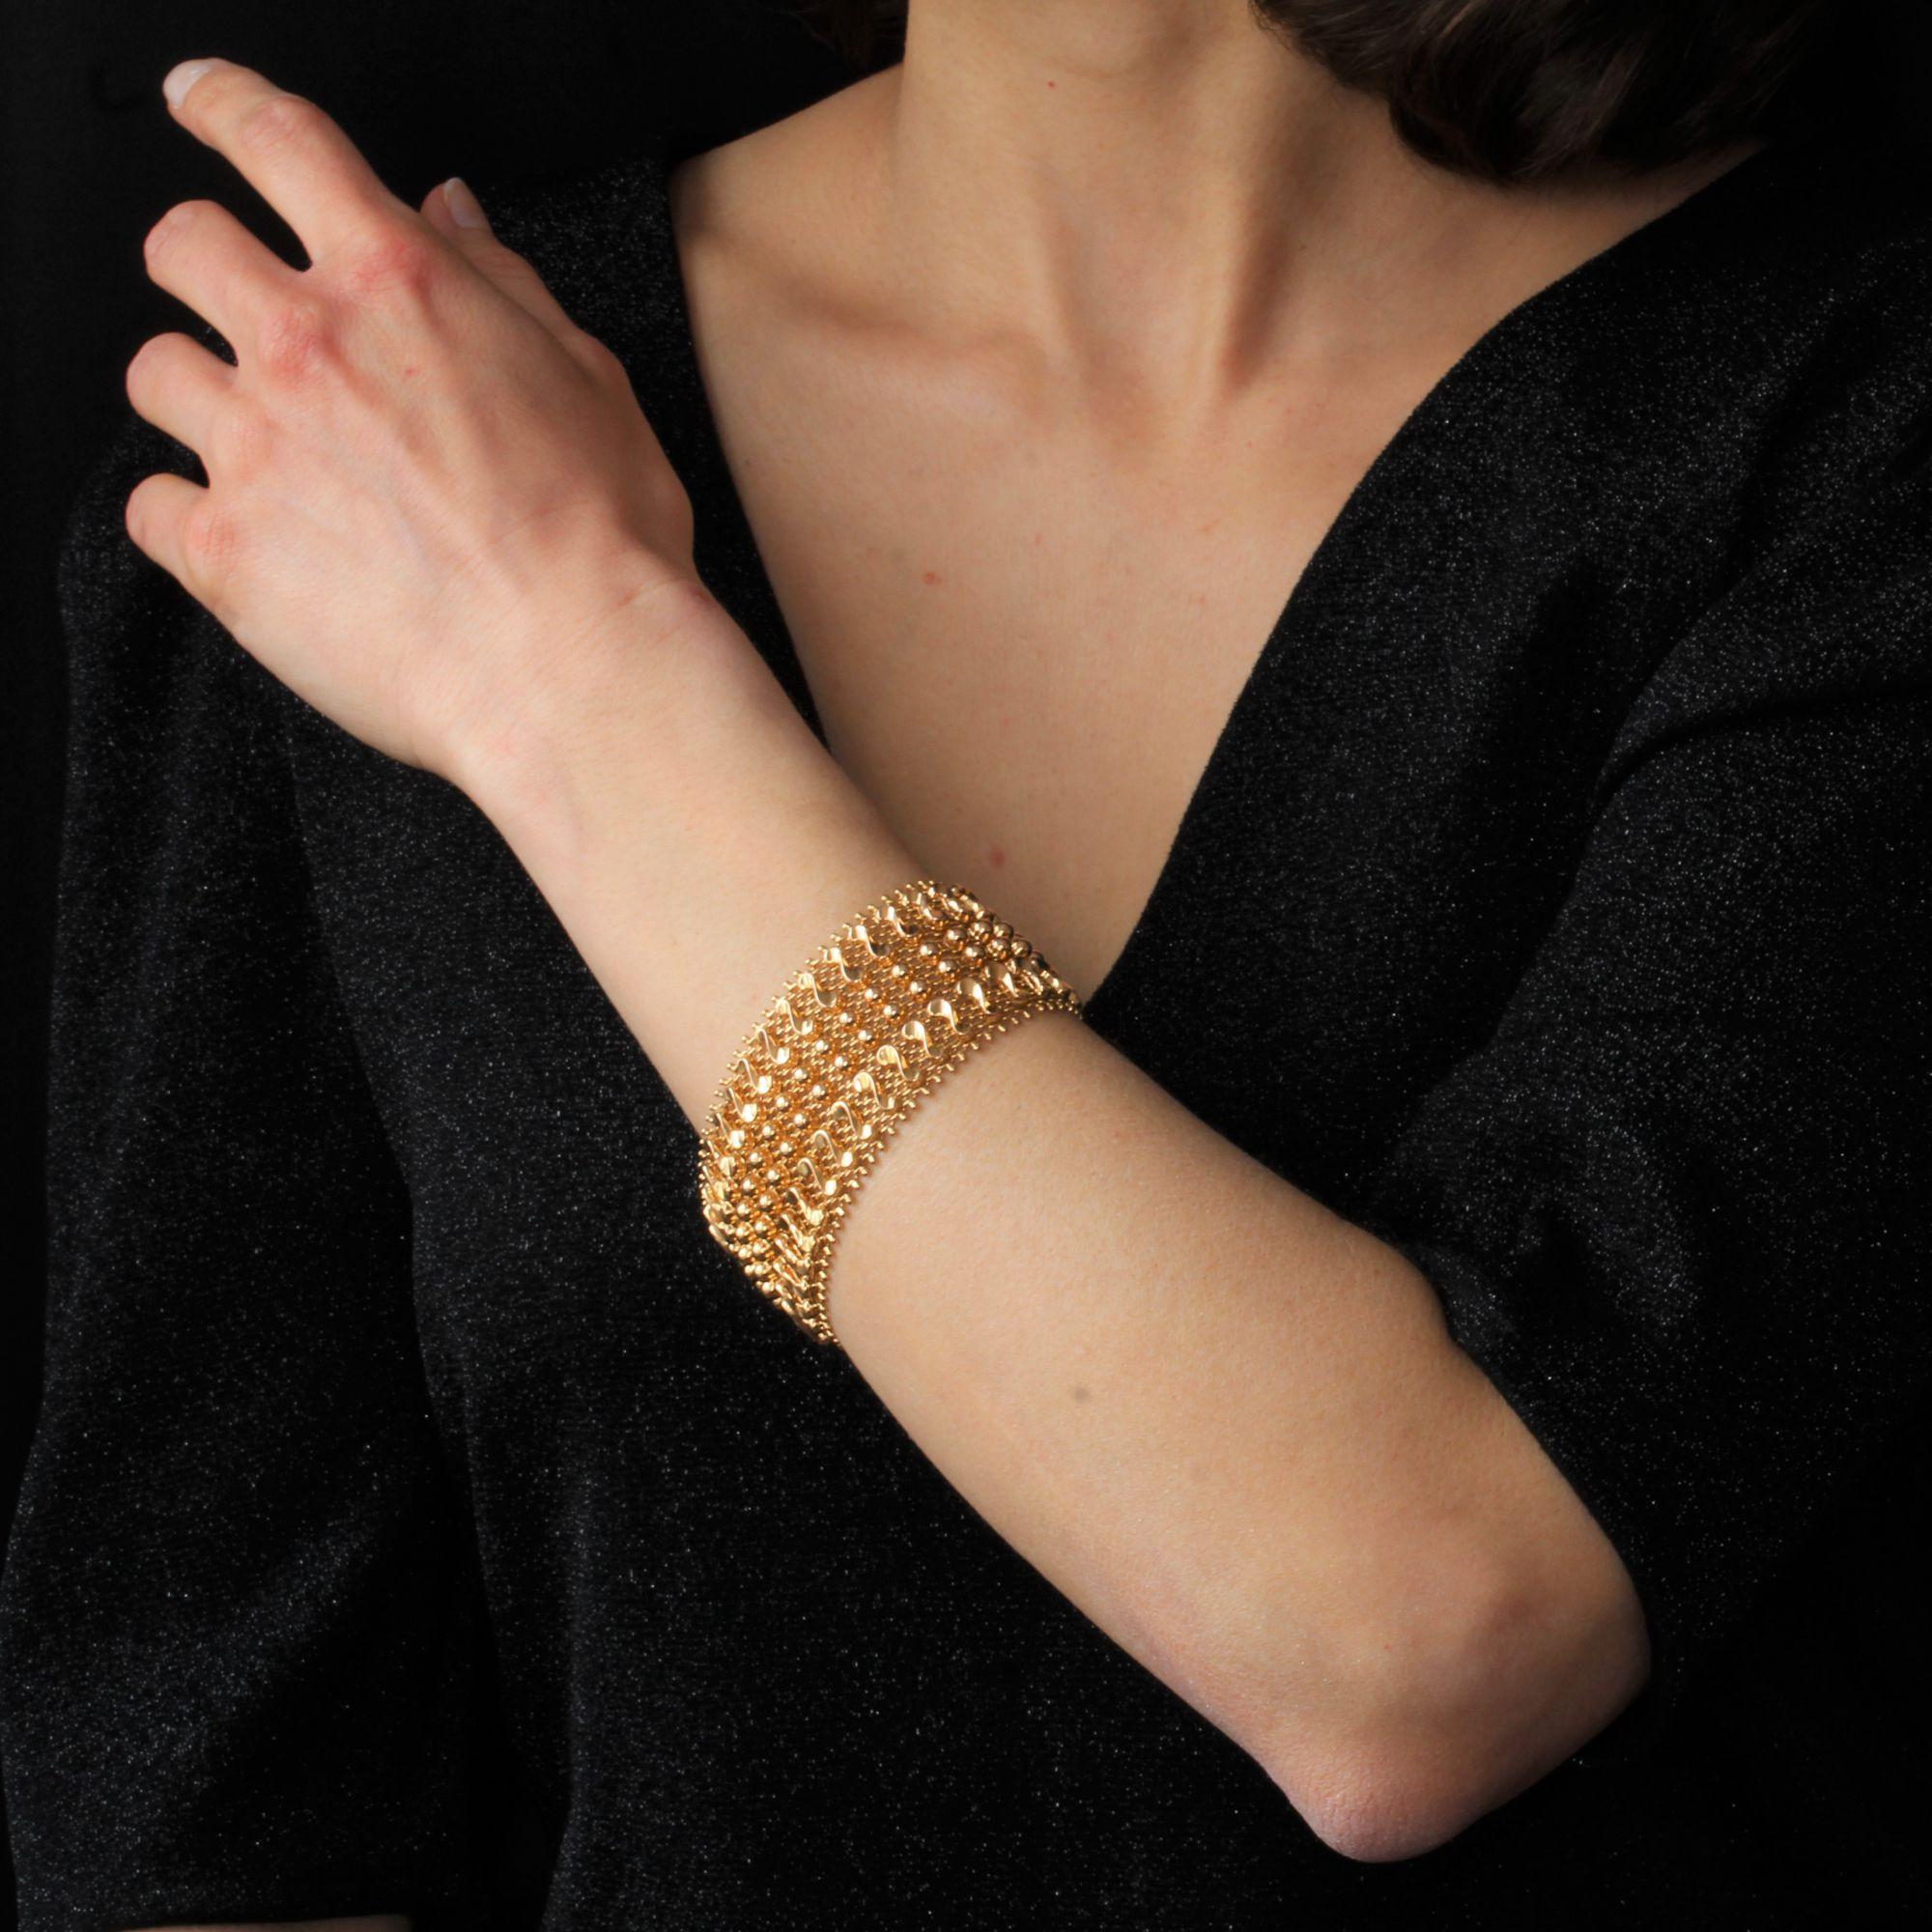 Bracelet in 18 karat rose gold.
Sublime retro bracelet, it is formed of a weaving of gold threads set in applique on top of a double line of gold pearls, and a double line of arabesque patterns. On both sides, the fabric ends with a beaded. The